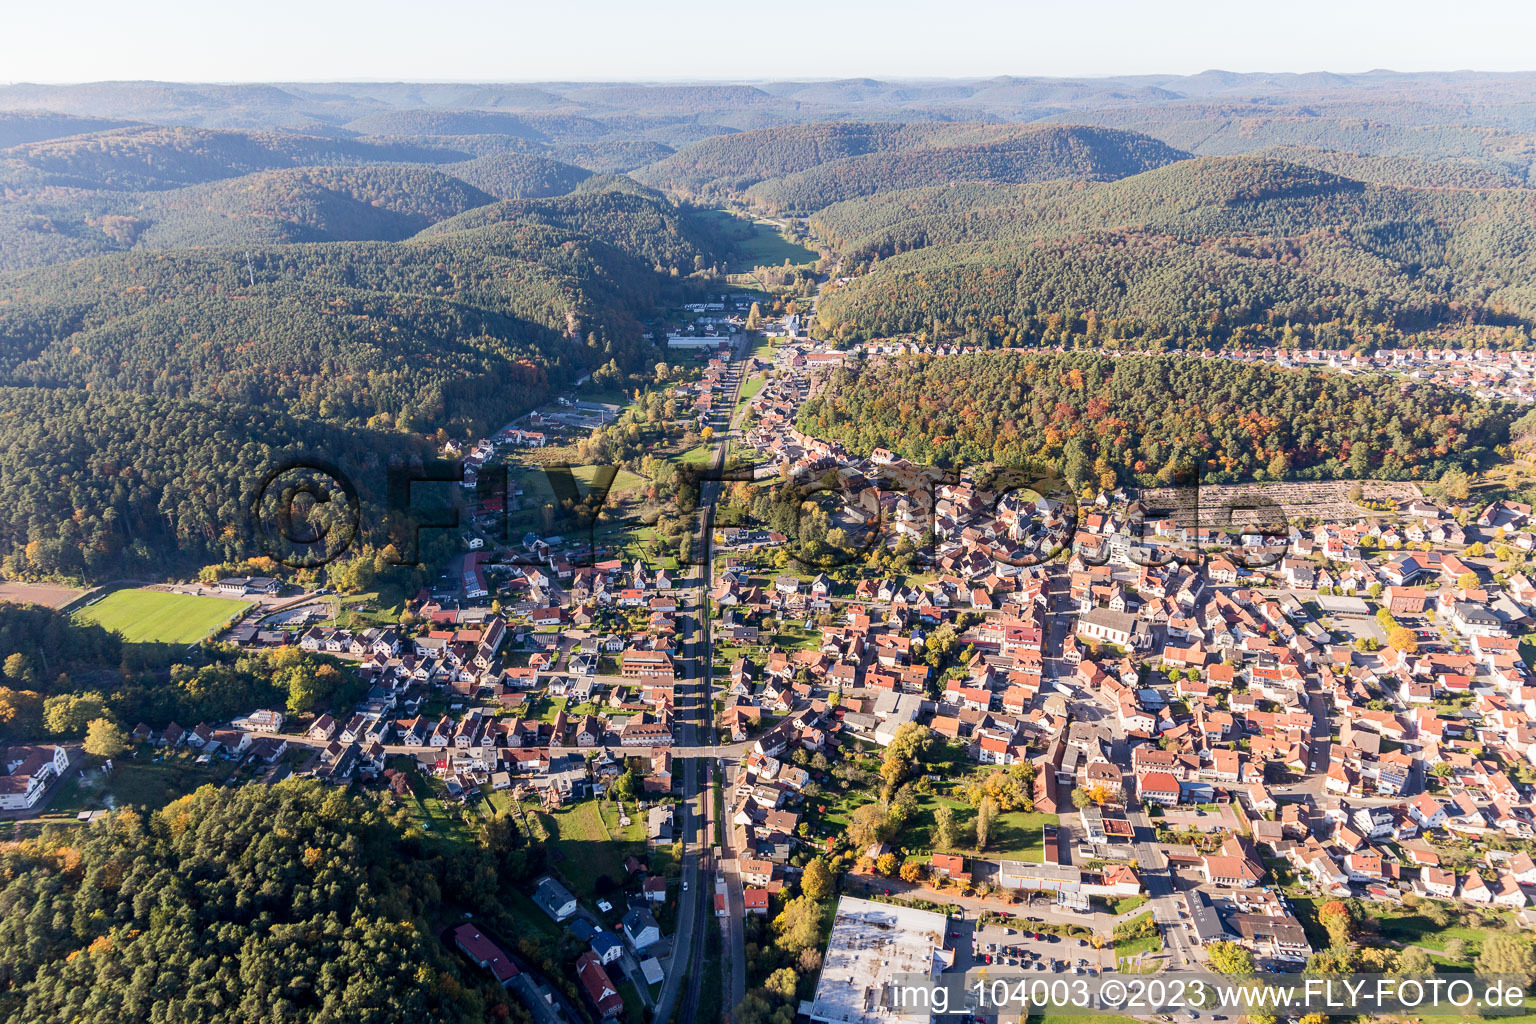 Dahn in the state Rhineland-Palatinate, Germany seen from a drone